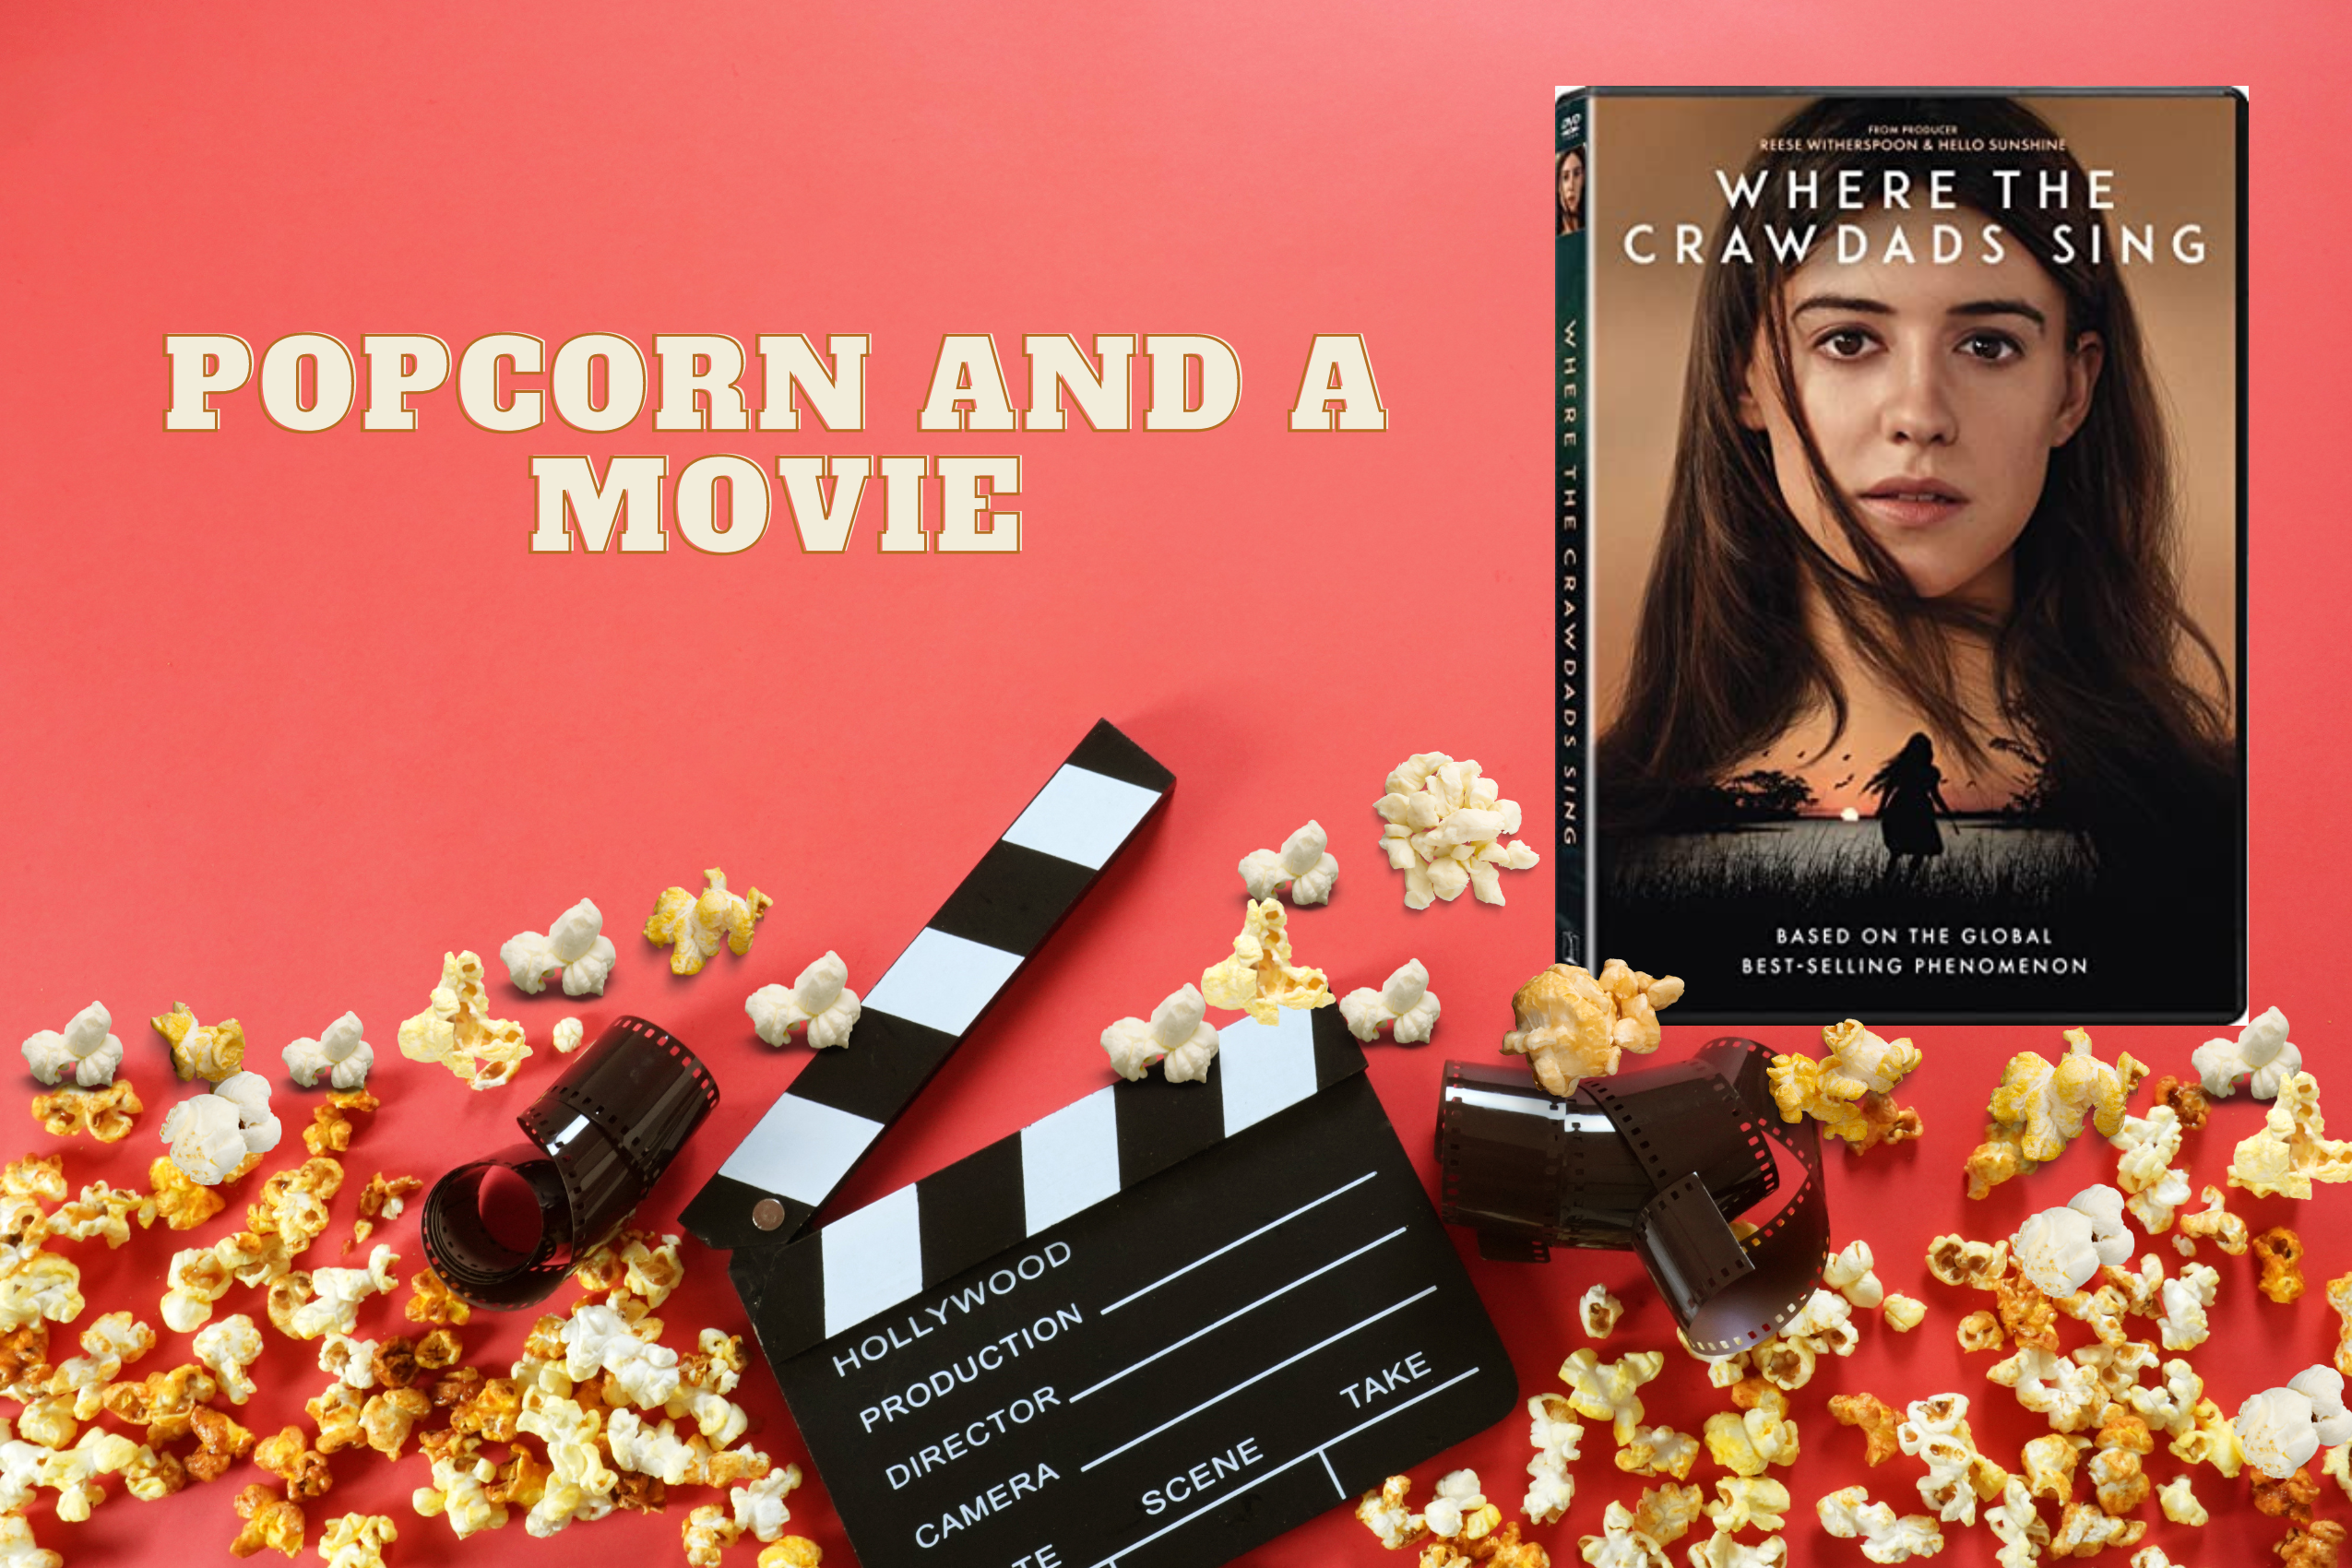 popcorn and a movie, popcorn, film strips and clapper board, where the crawdads sing dvd cover